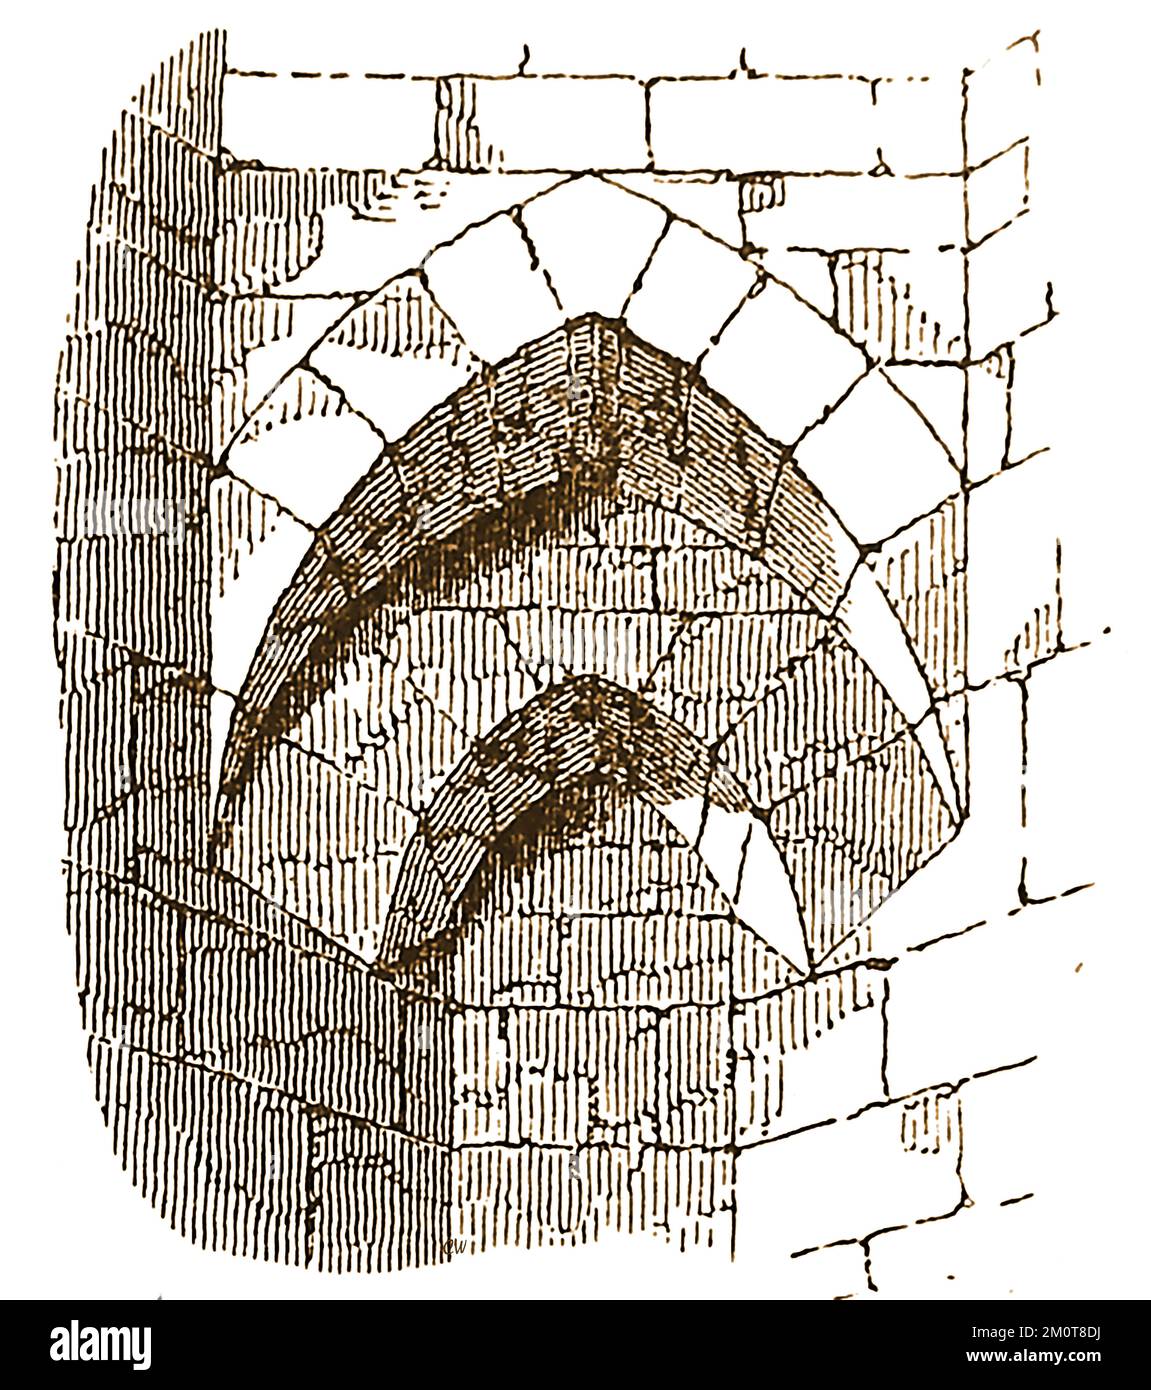 A 19th century engraving showing a SQUINCH, an architectural feature  at Maxstoke Priory,  an Augustinian priory in Warwickshire, England.(consecrated  8 July 1342 ). A squinch is a straight or arched structure across an interior angle of a square tower to carry a superstructure such as a dome or other feature in an attempt to even out the weight above it. Stock Photo